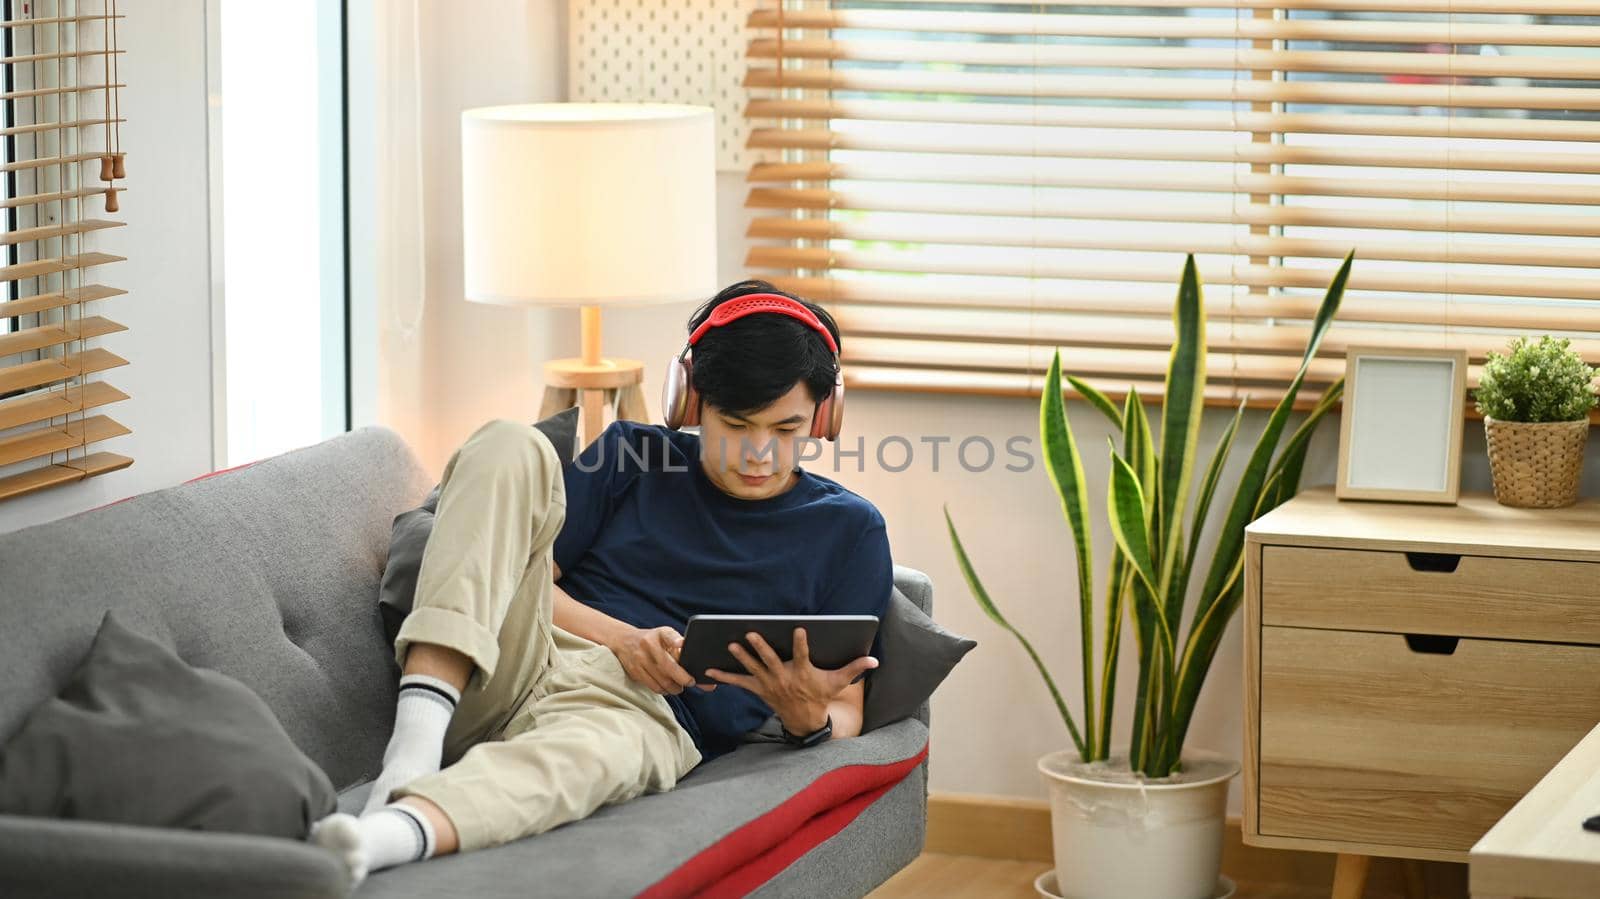 Relaxed asian man wearing wireless headphone lying on couch and surfing internet on digital tablet.